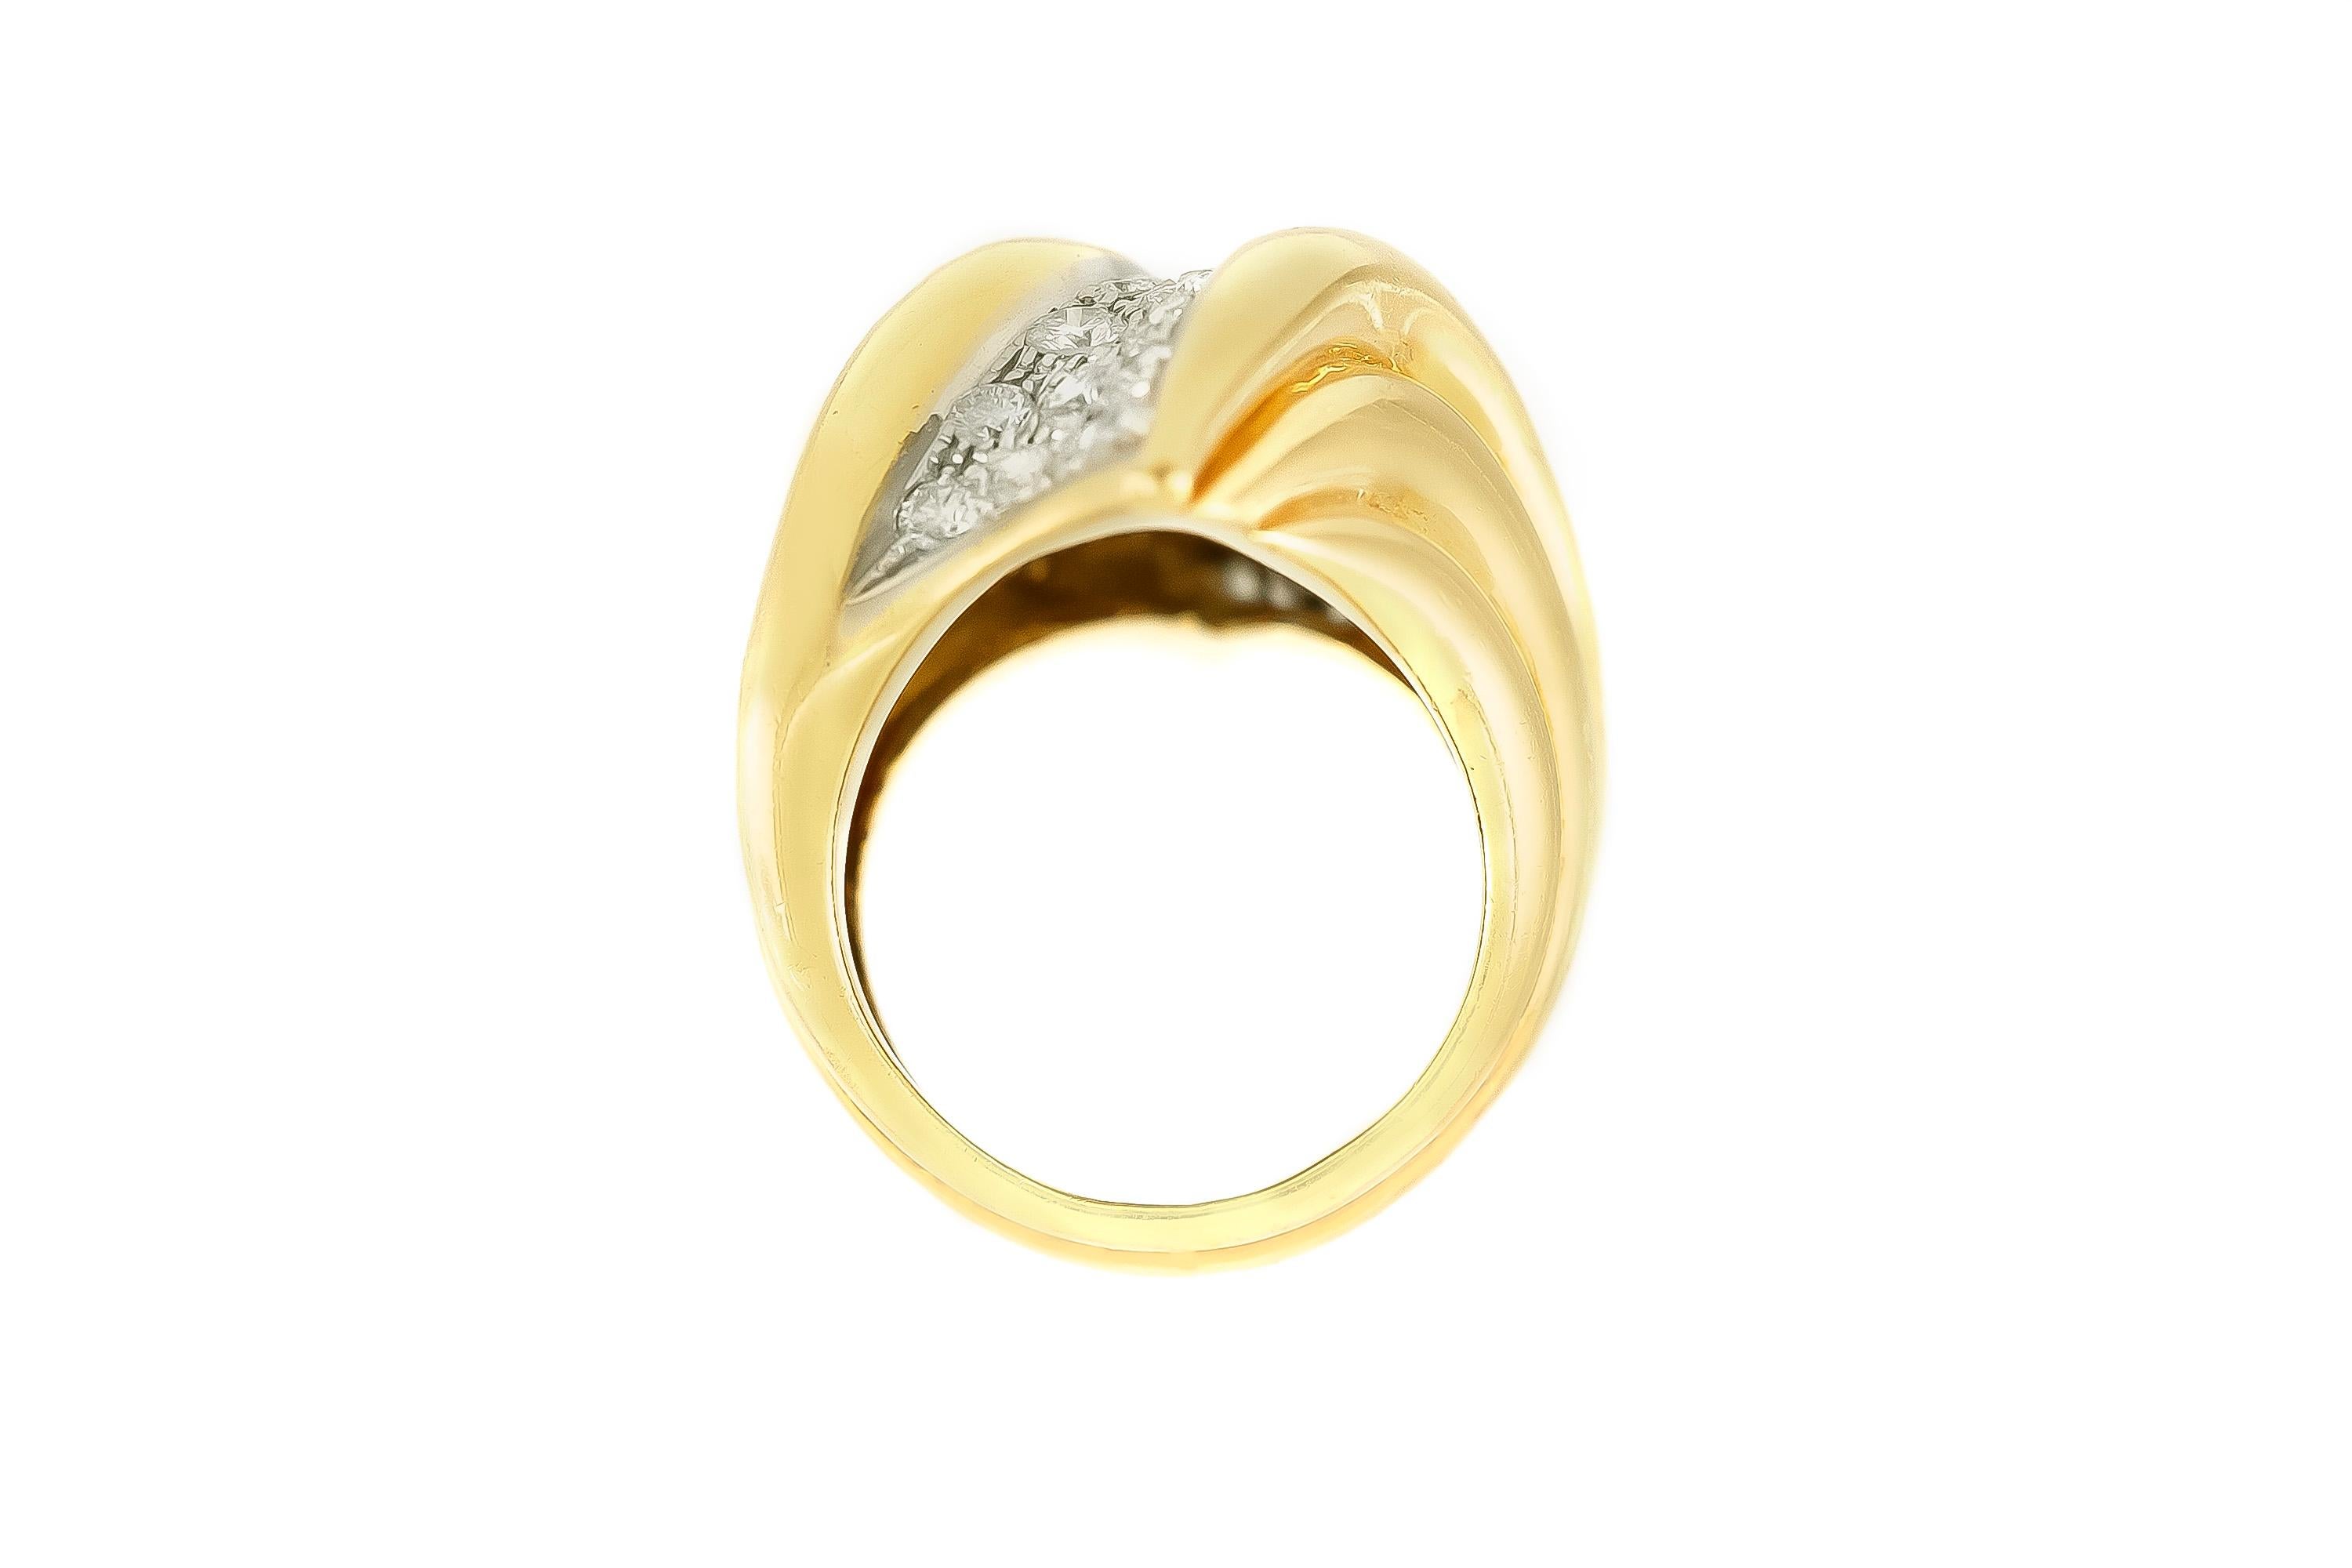 The ring is finely crafted in 18k yellow gold with diamonds weighing approximately total of 1.50 carat.
Circa 1970.
